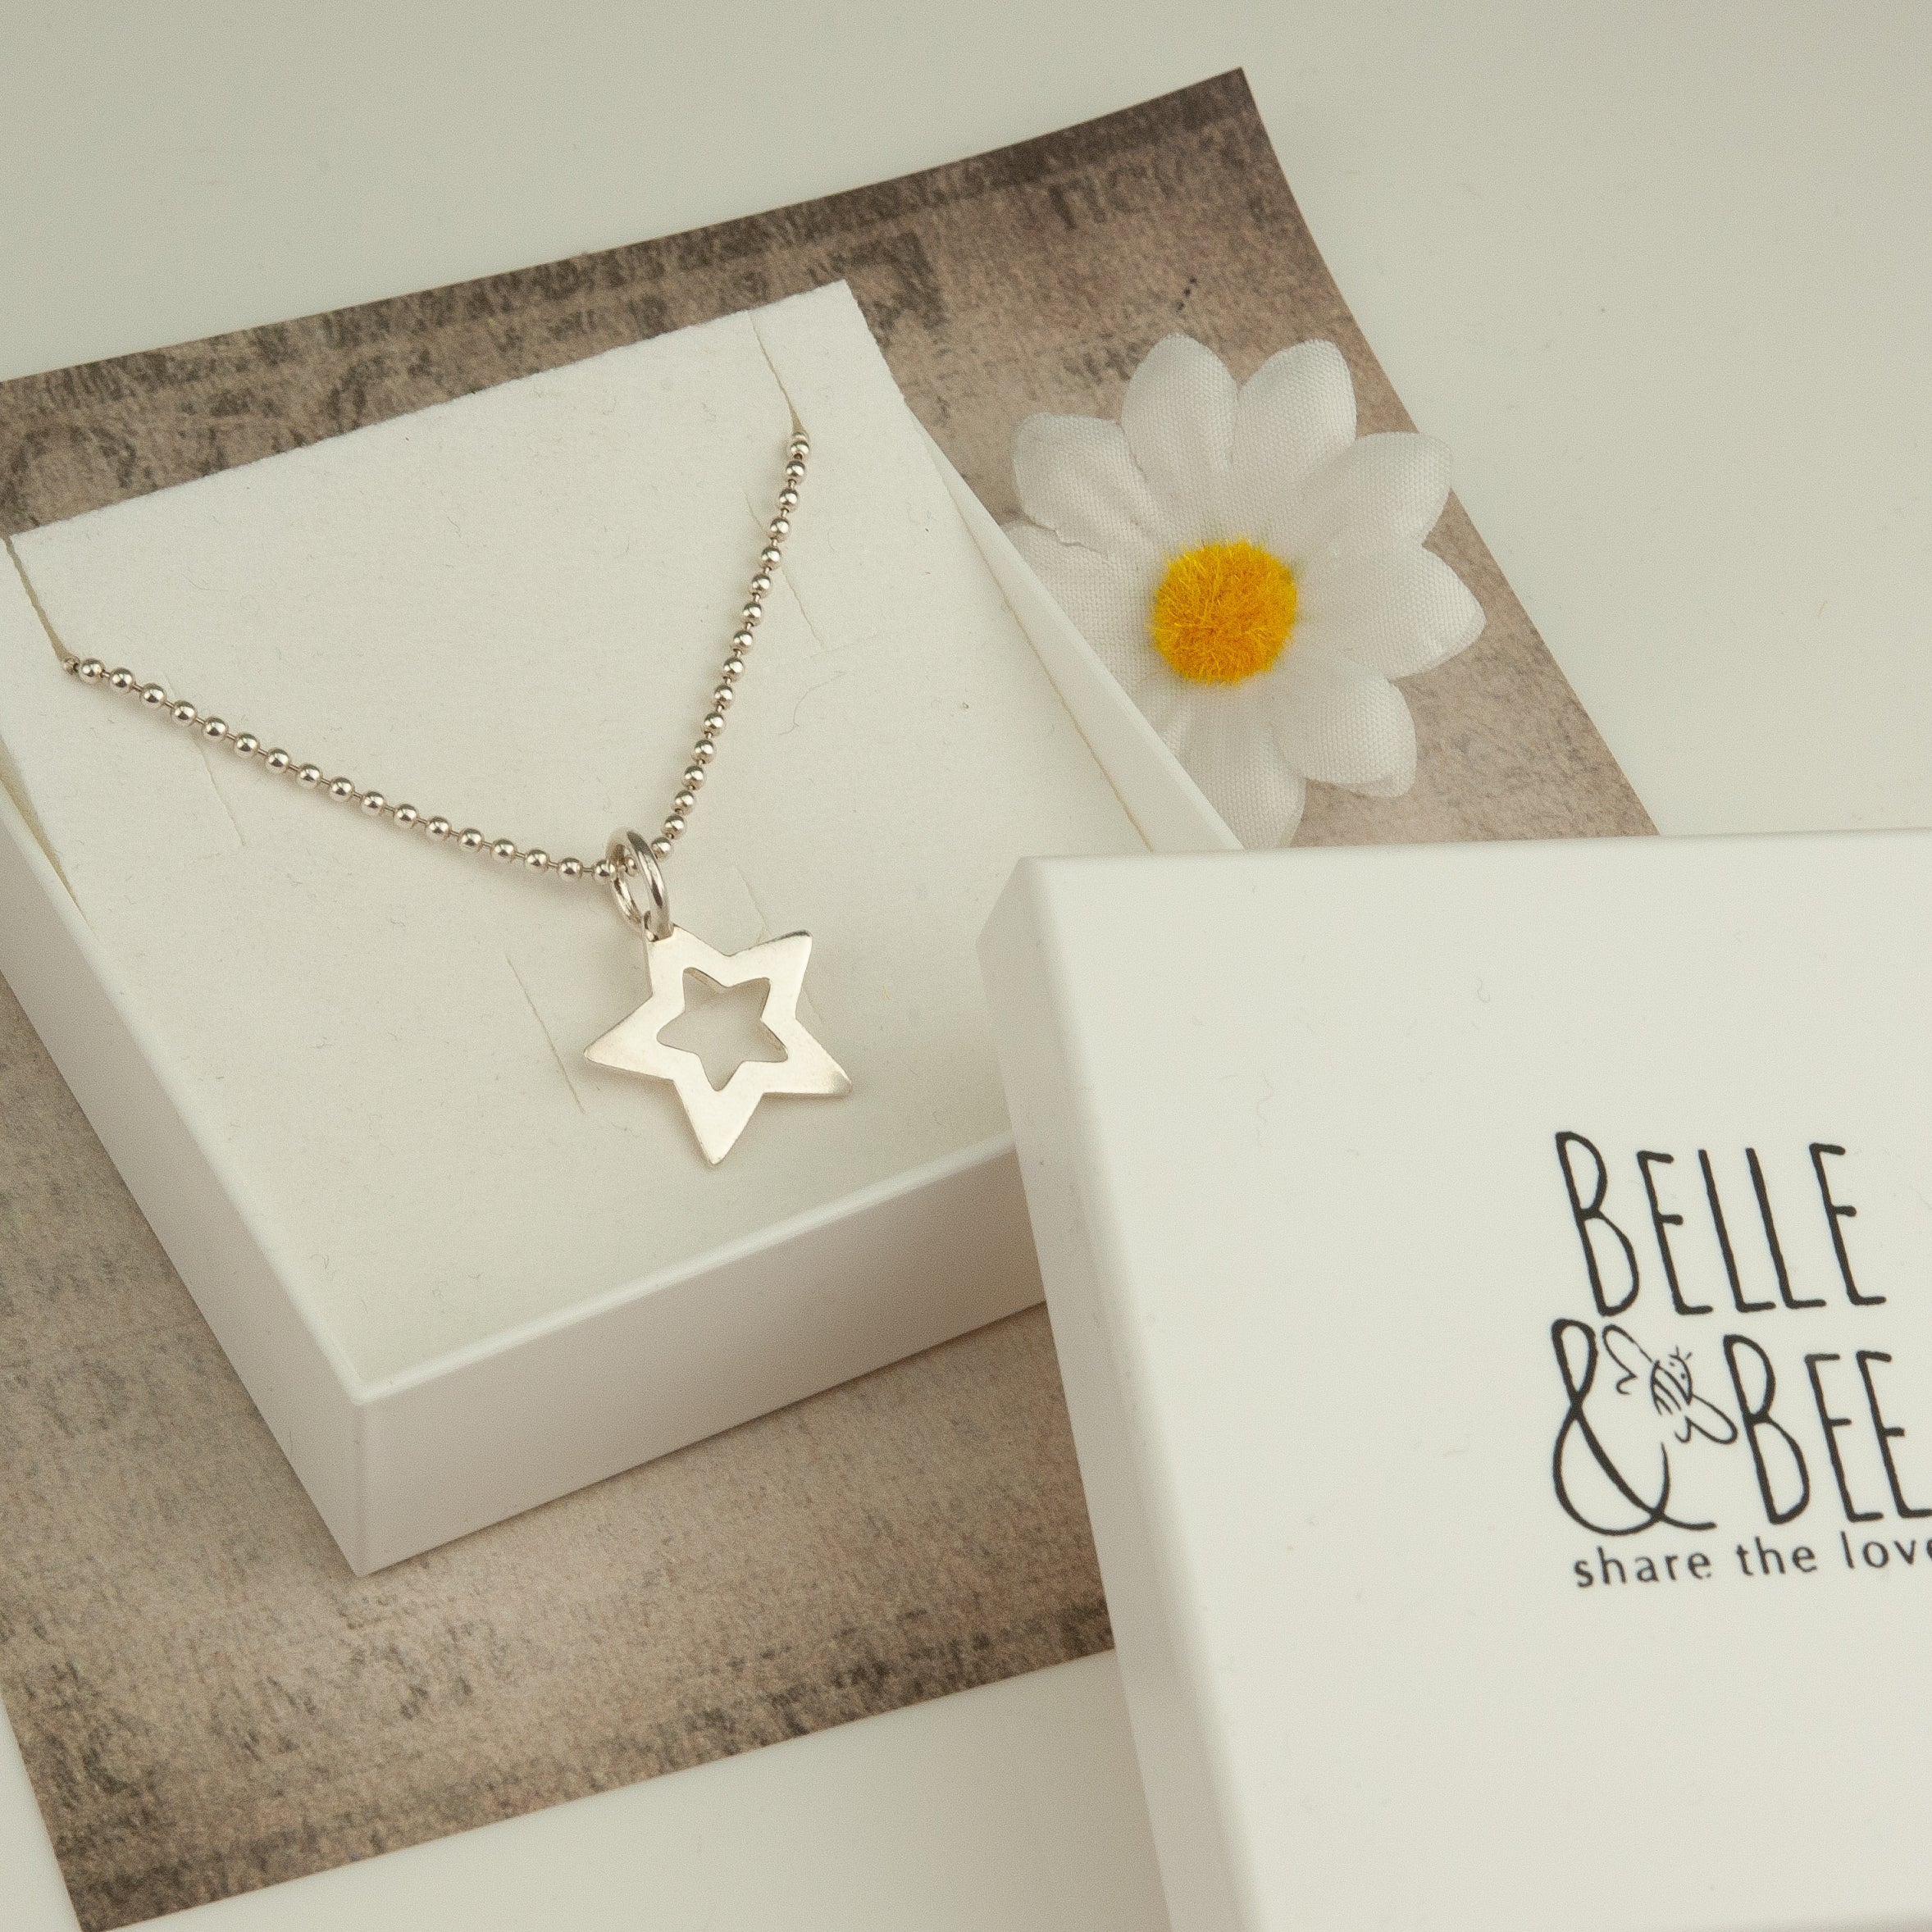 Belle & Bee sterling silver open star necklace